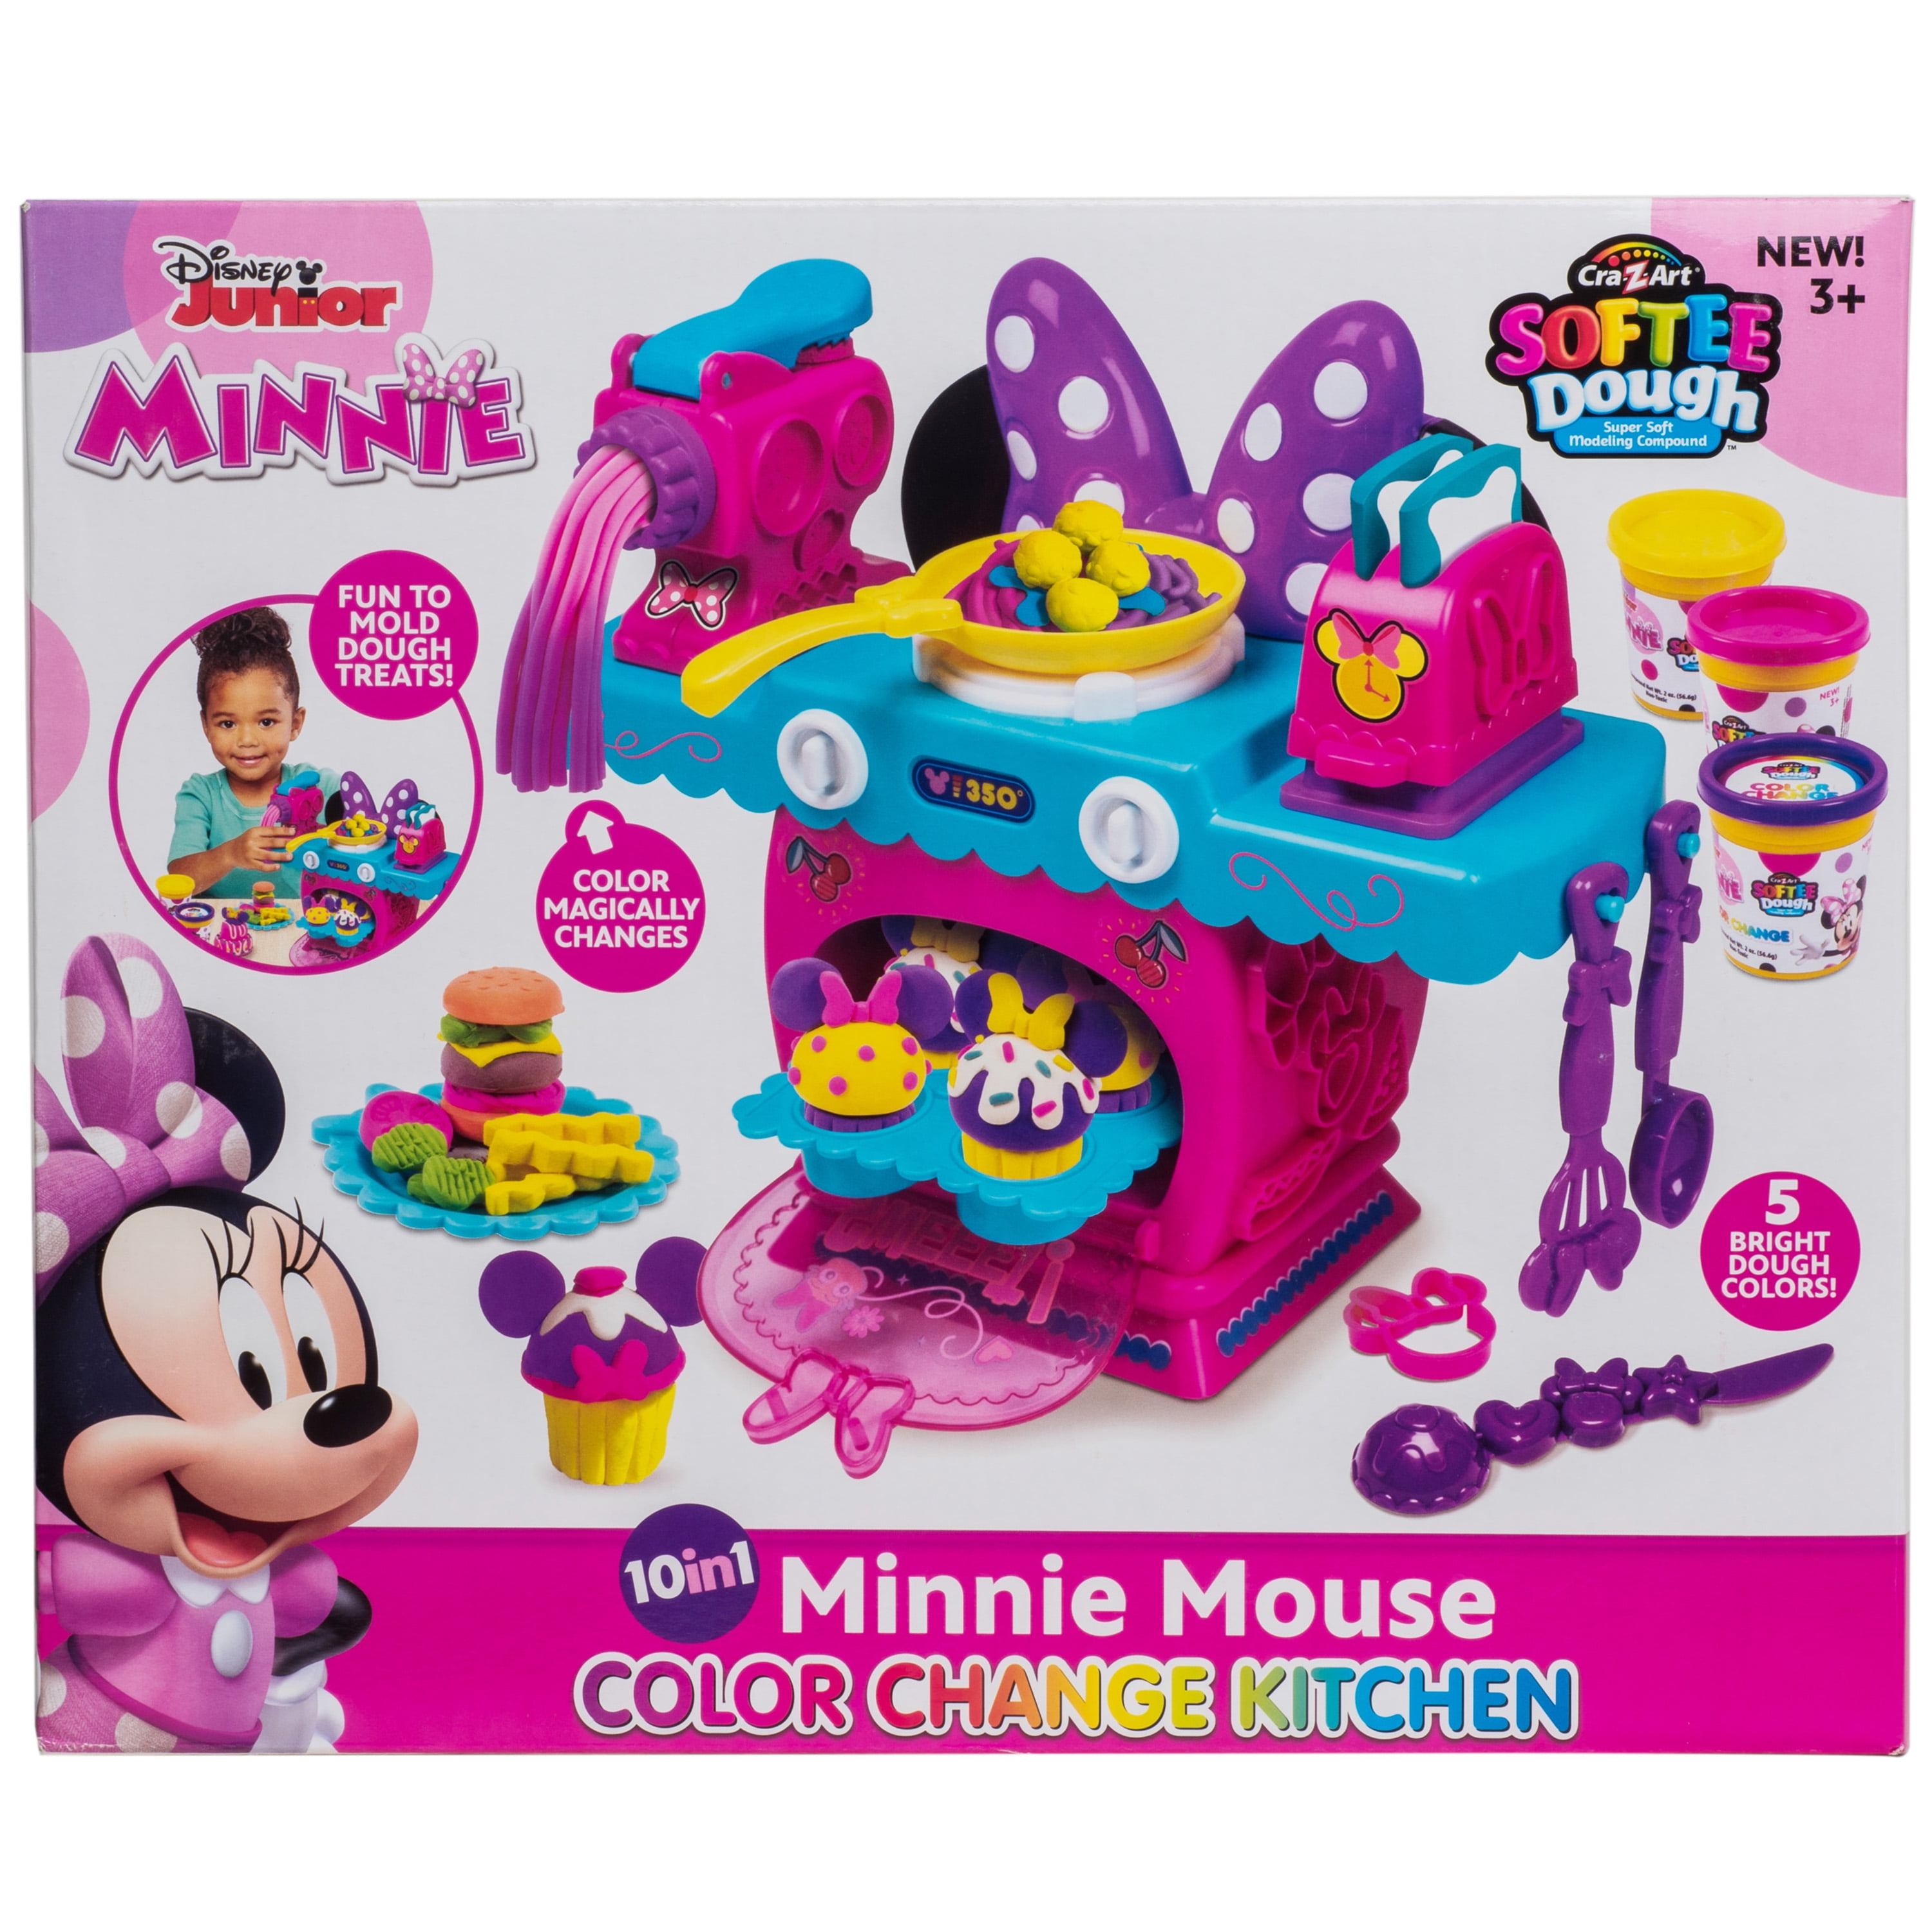 Cra-Z-Art Softee Dough Minnie Mouse Kitchen, Multicolor, Child Ages 3 and up